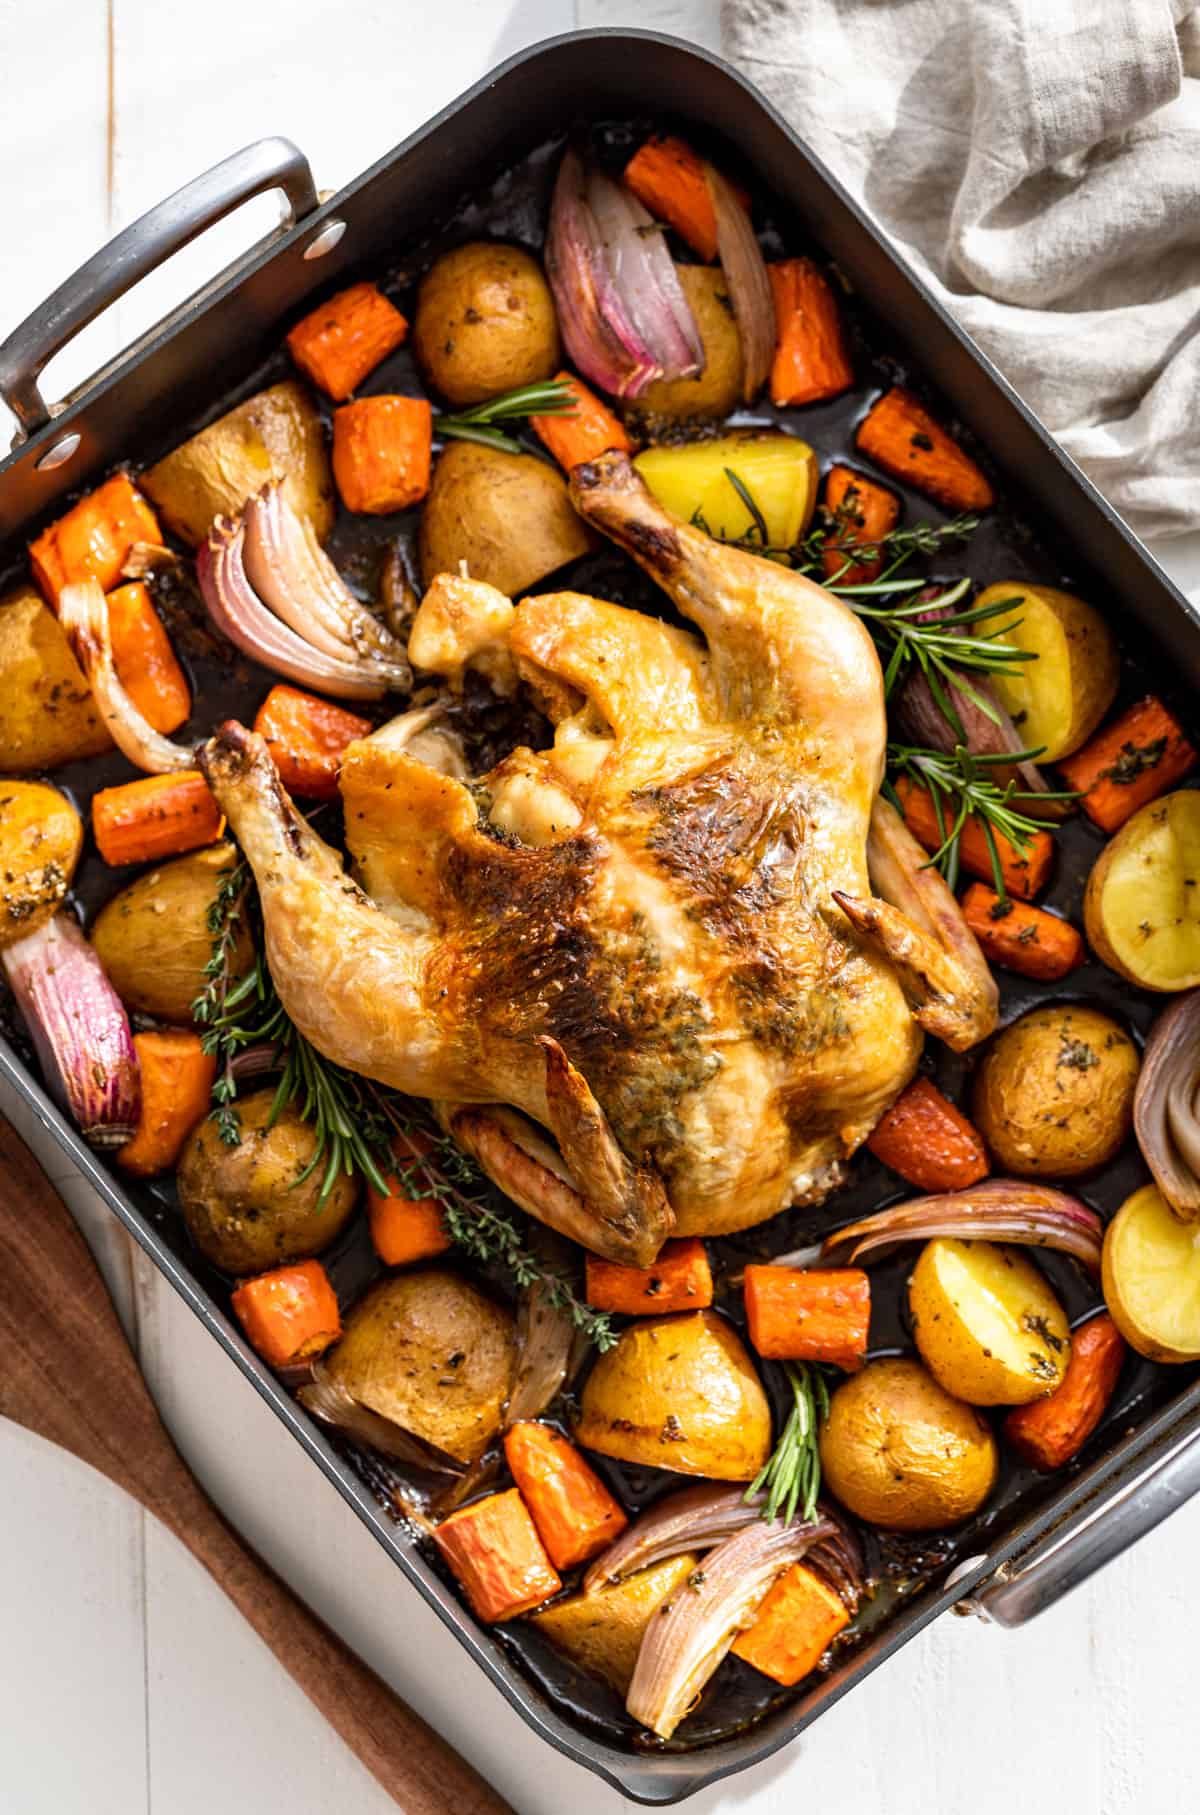 Straight down view of finished Roasted Chicken and Vegetables in a grey roaster with a wooden spatular on the side.